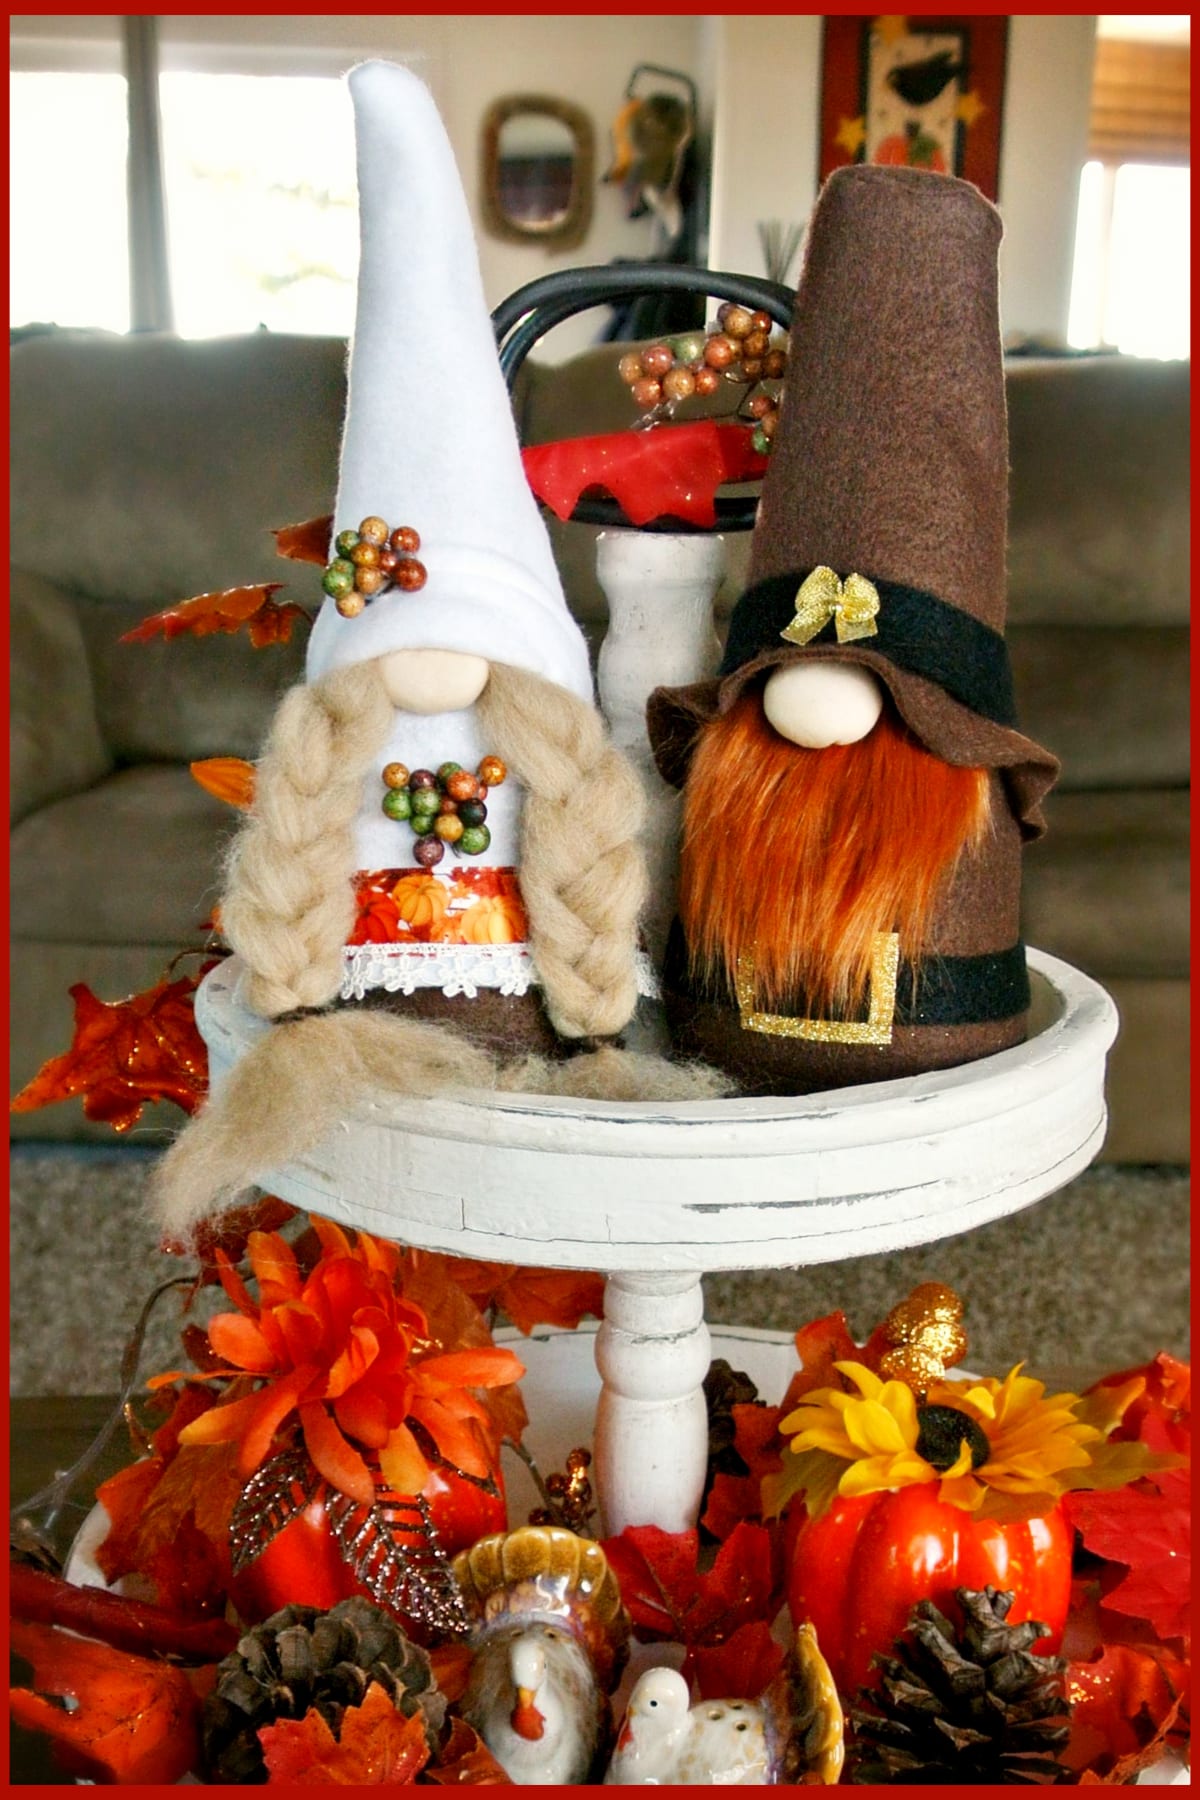 Tray decor ideas for Thanksgiving - 2 tiered wooden tray on coffee table in living room - super cute centerpiece